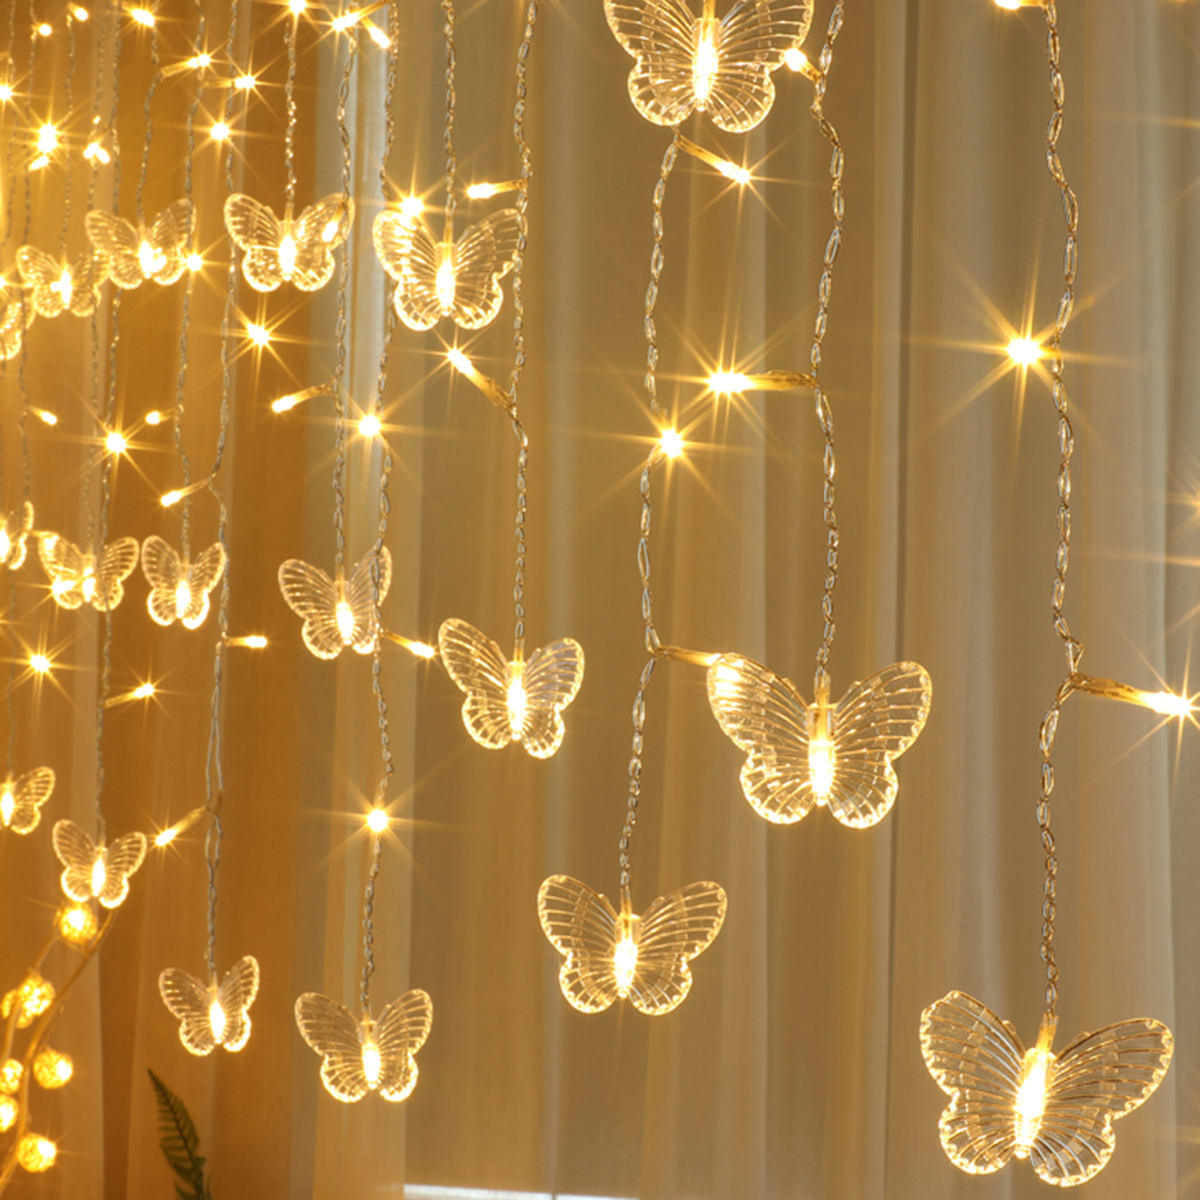 4M-LED-Fairy-Light-Butterflies-String-Light-Christmas-Party-Holiday-lighting-1853987-5